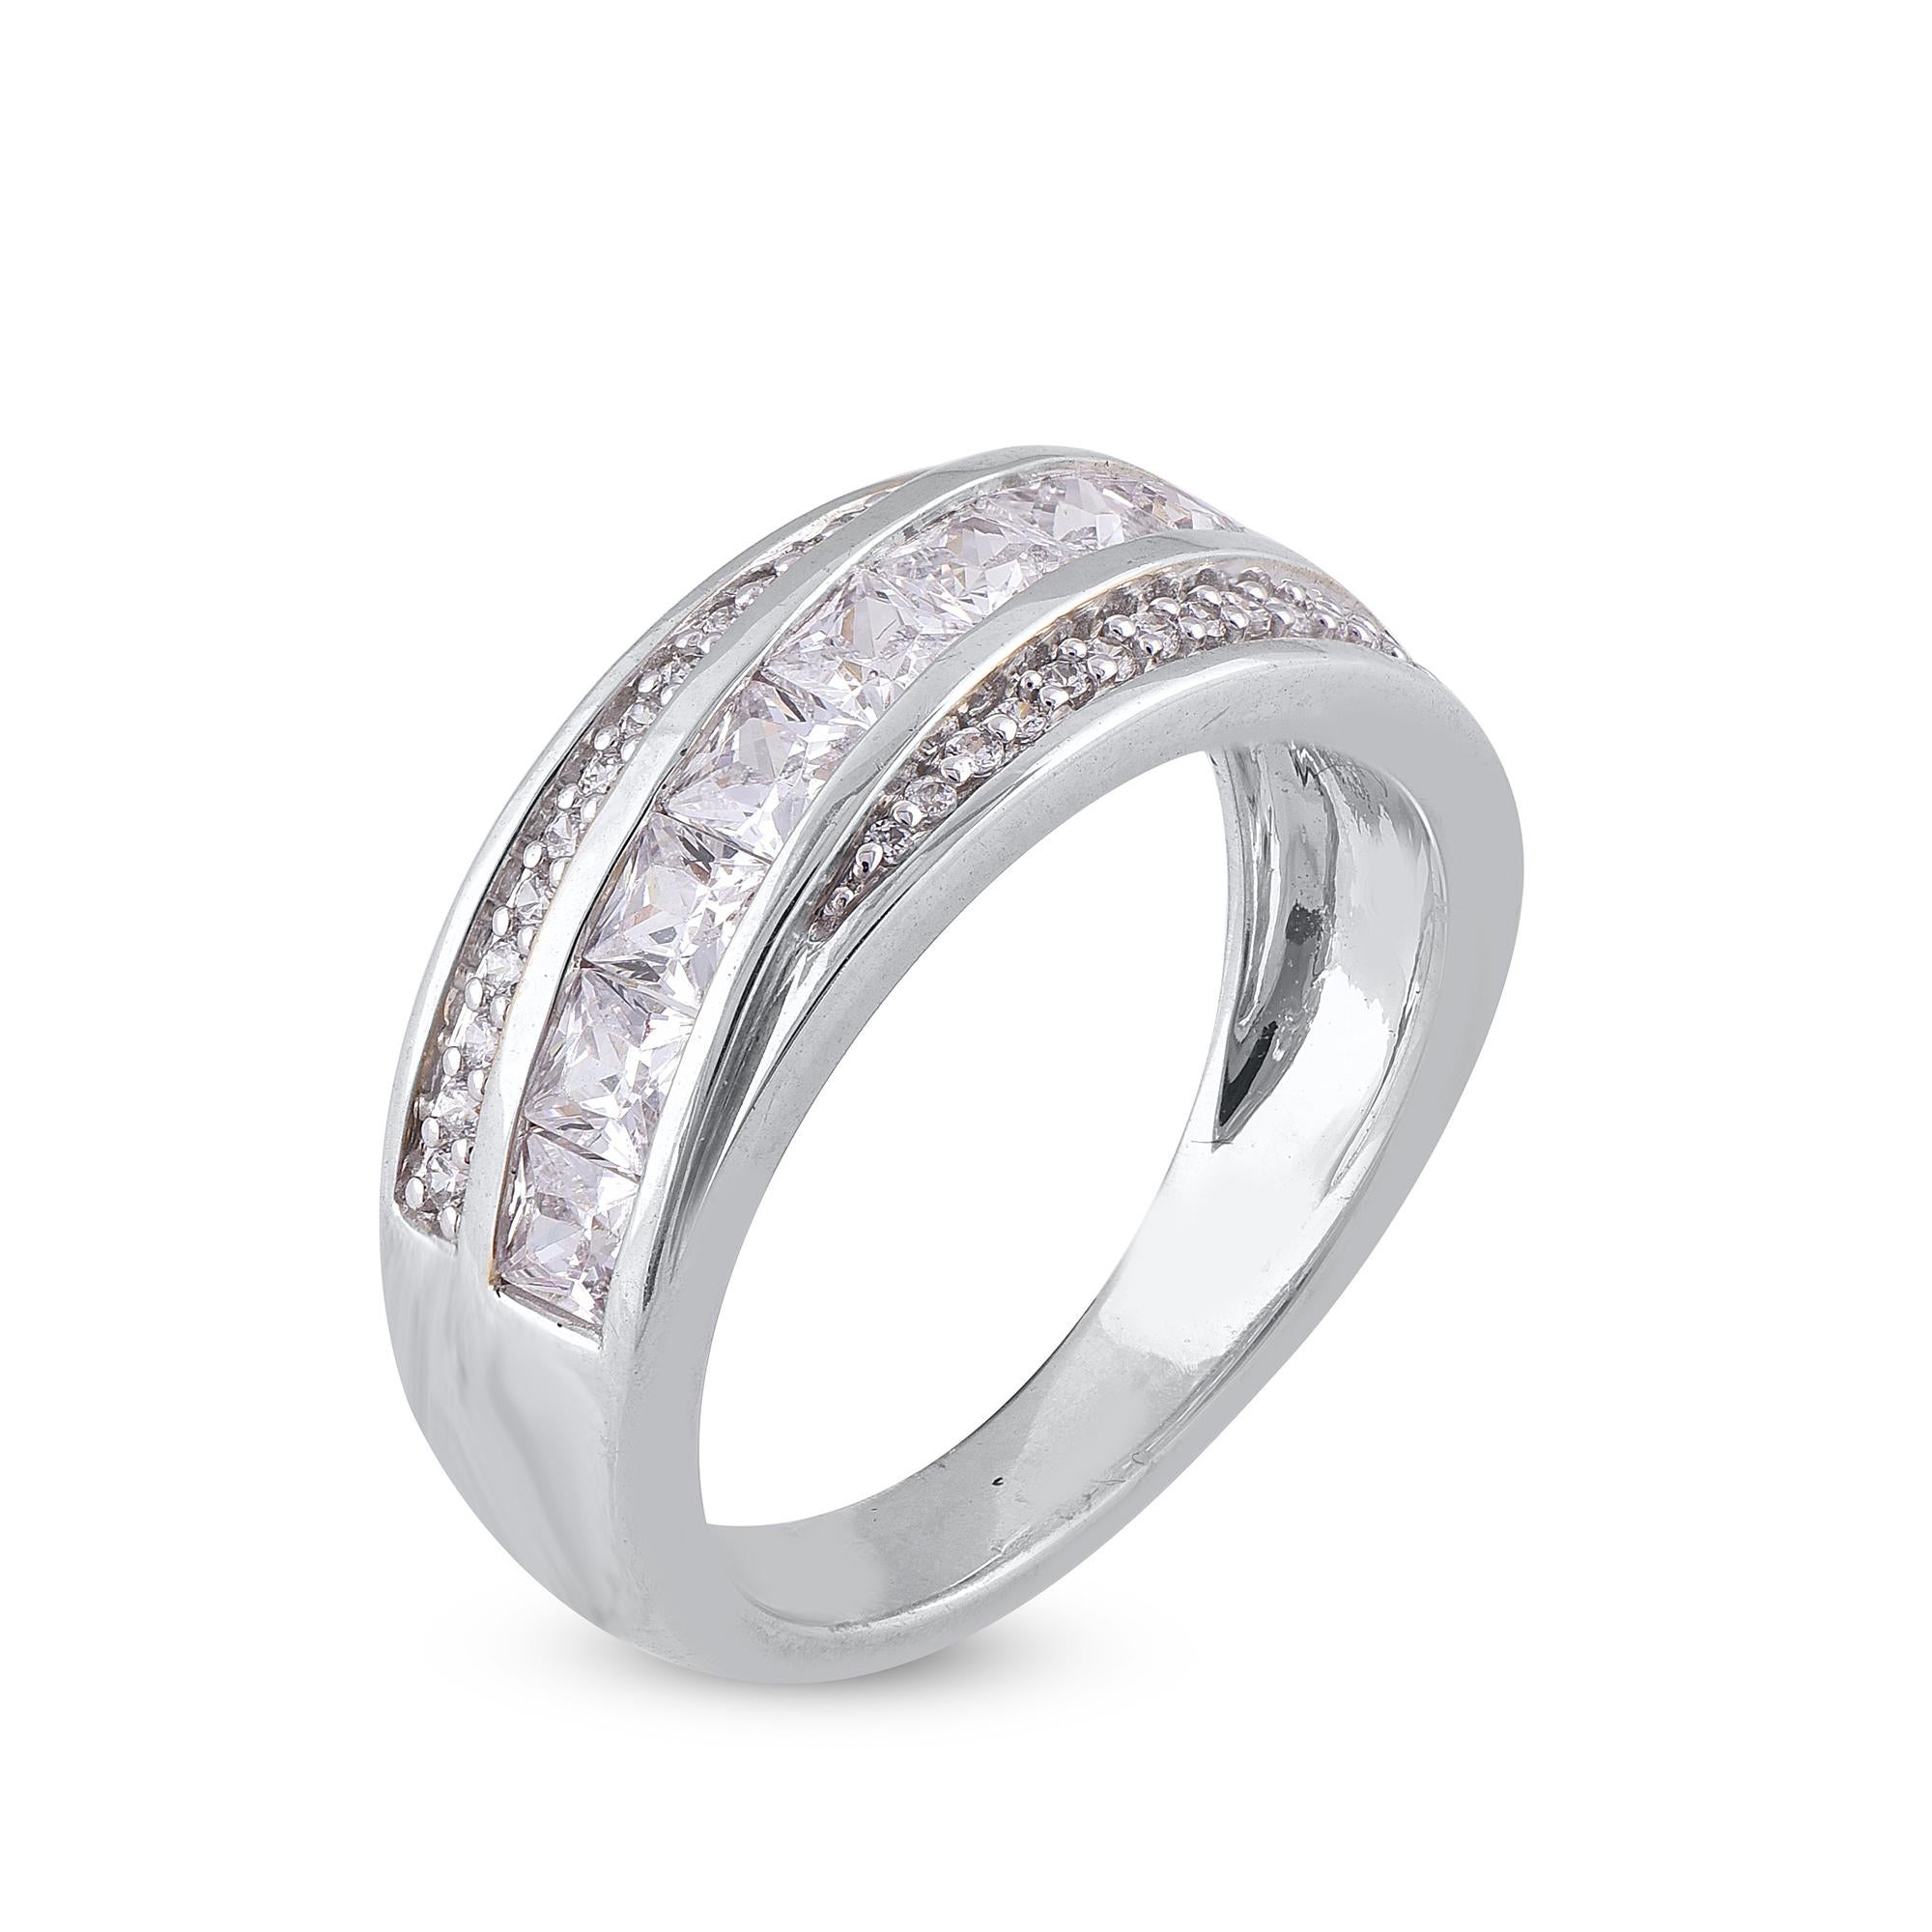 Add sparkle to your day or night look with this wide wedding band. The band is crafted from 14 karat gold in your choice of white, rose, or yellow, and features 26 Round and 9 princess cut diamond set in pave and channel set, H-I color I2 clarity